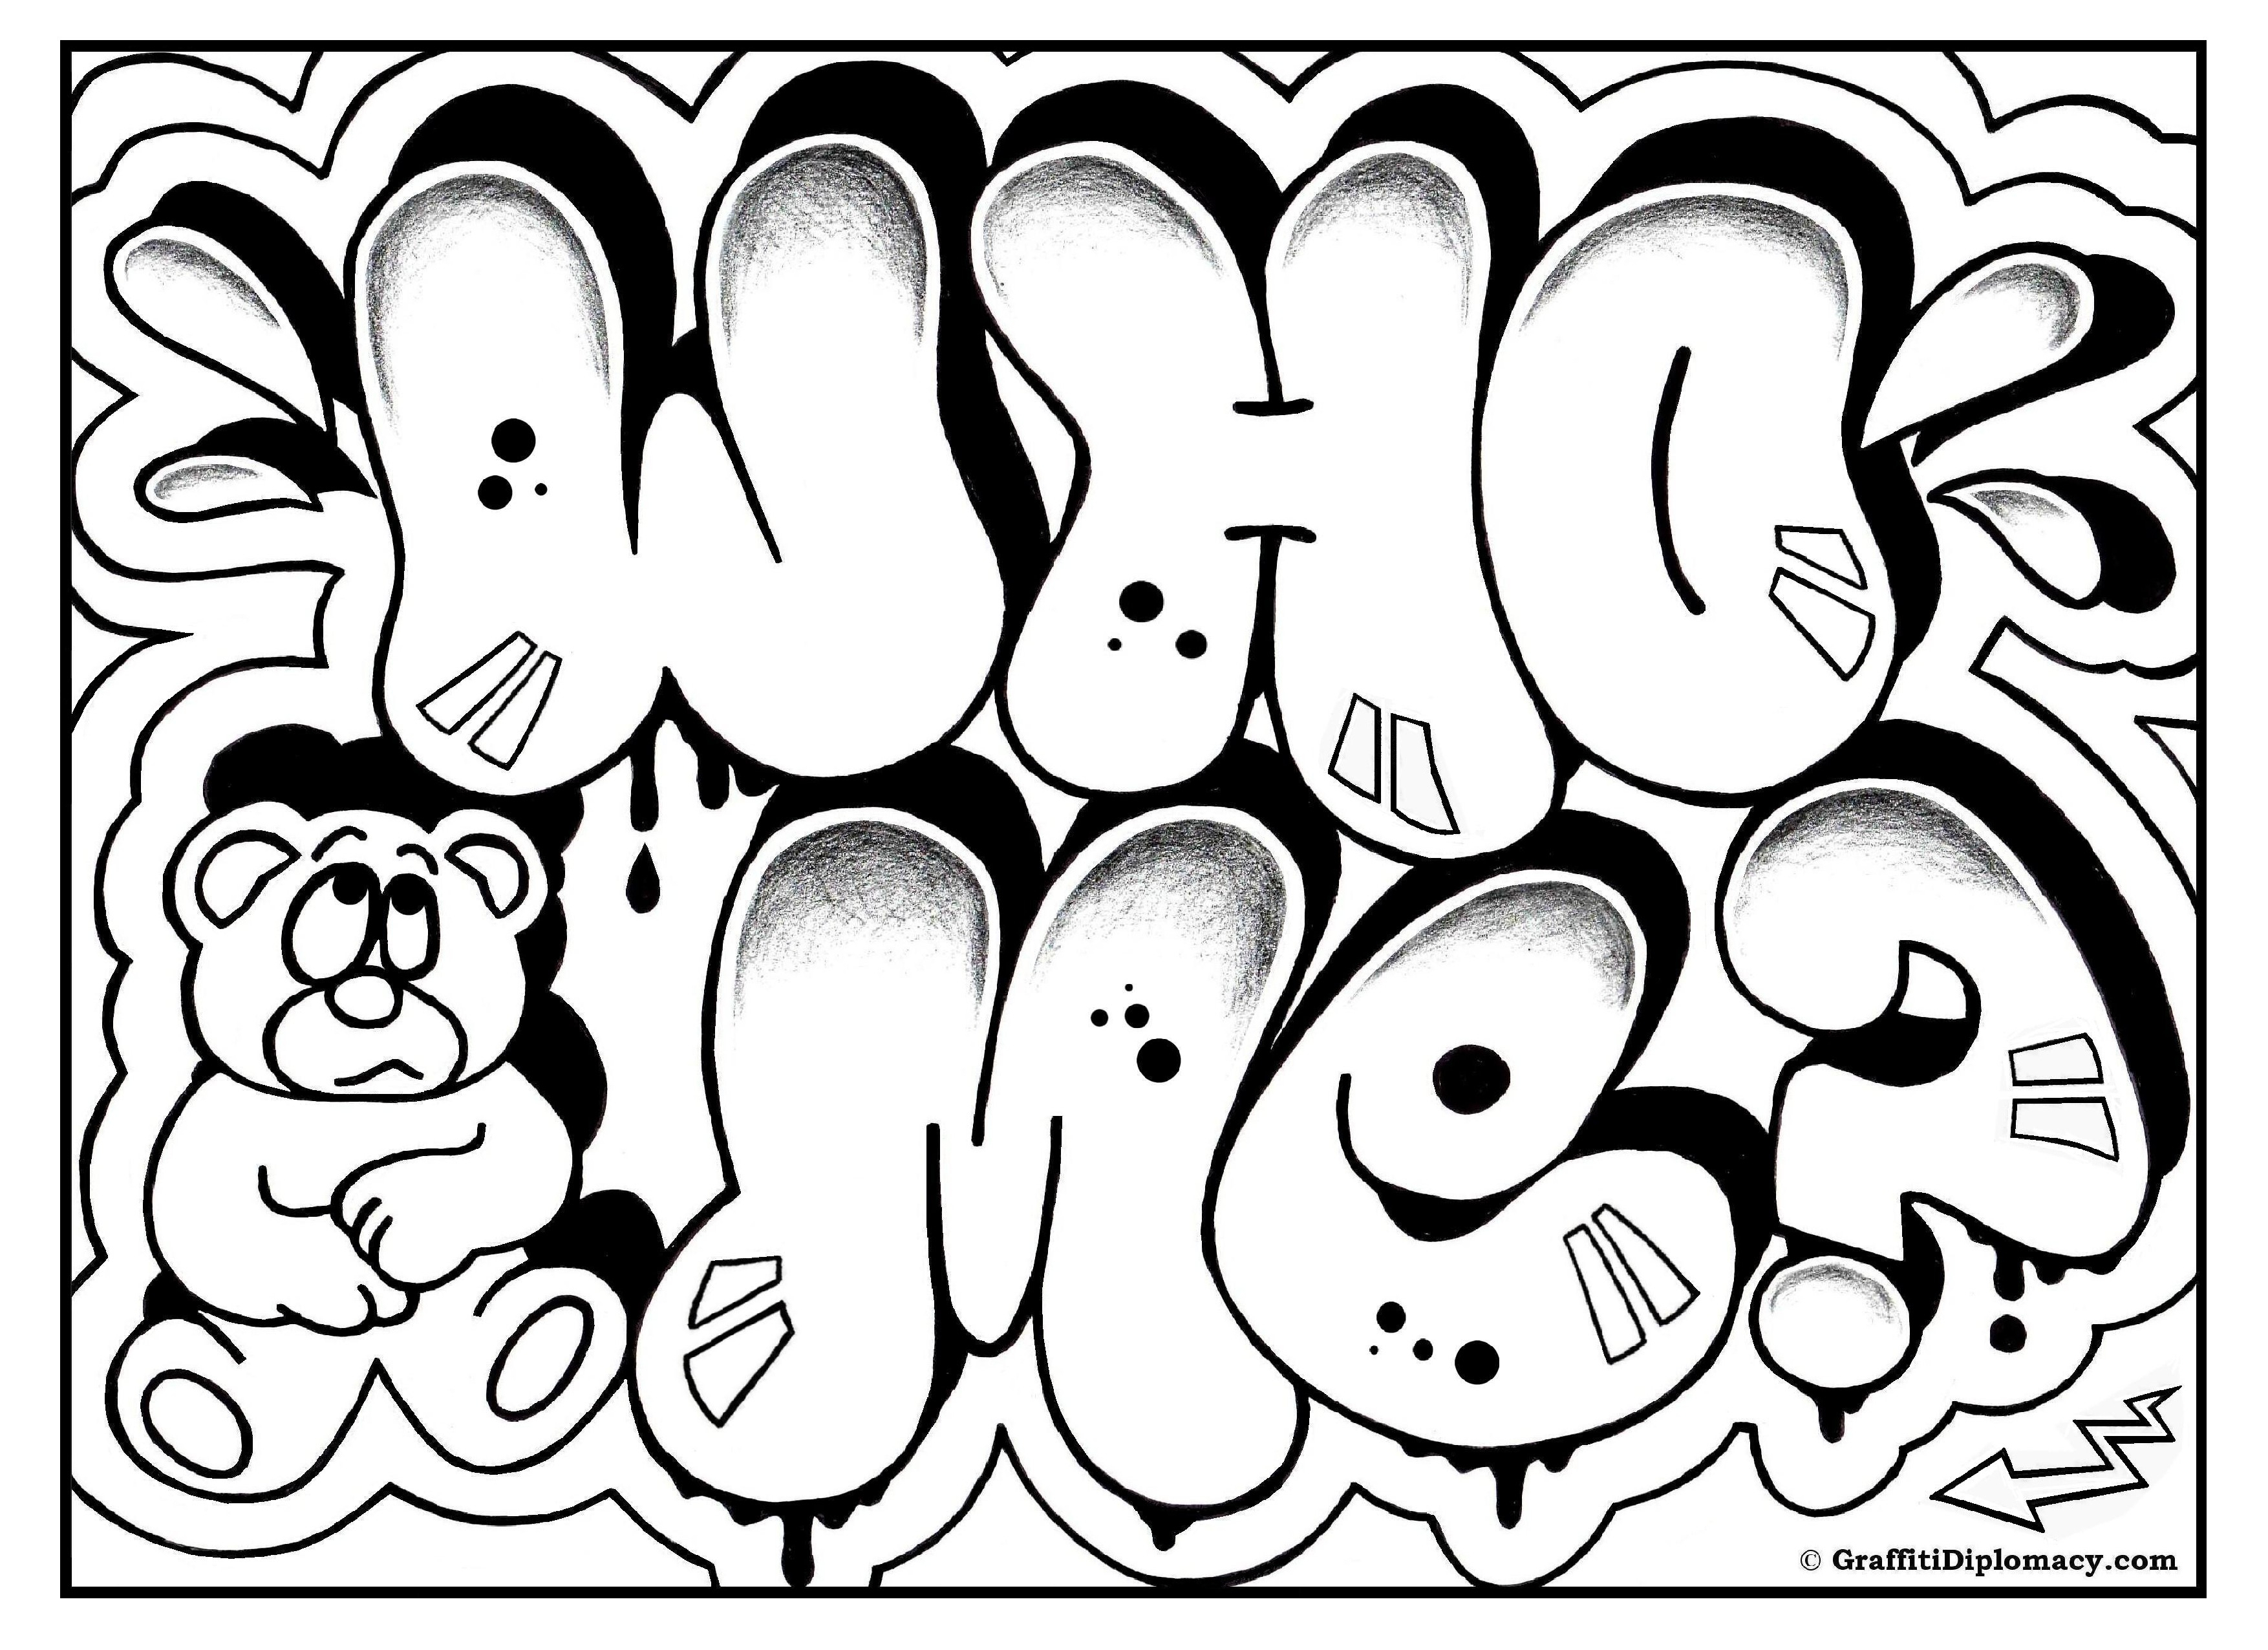 graffiti-coloring-pages-for-teenagers-at-getdrawings-free-download